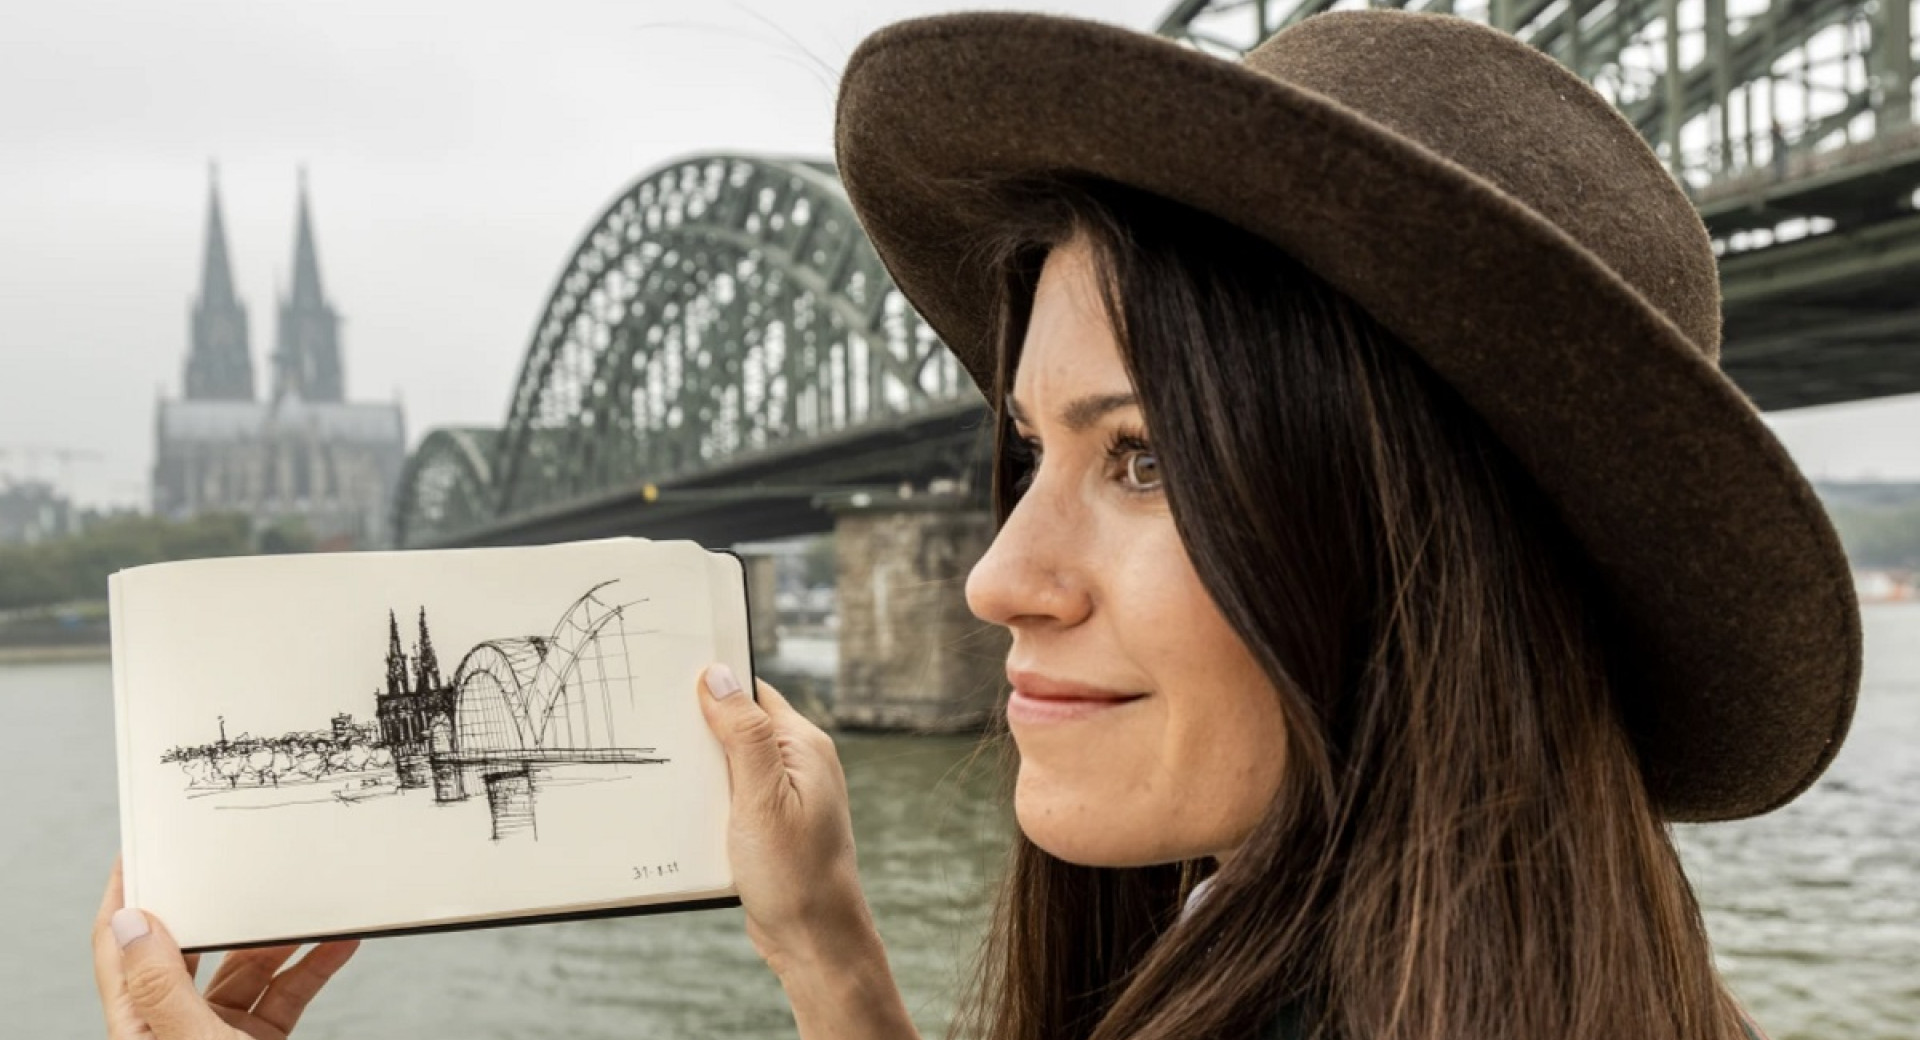 A profile photograph of a young woman holding a sketch. A large steel bridge in the background.